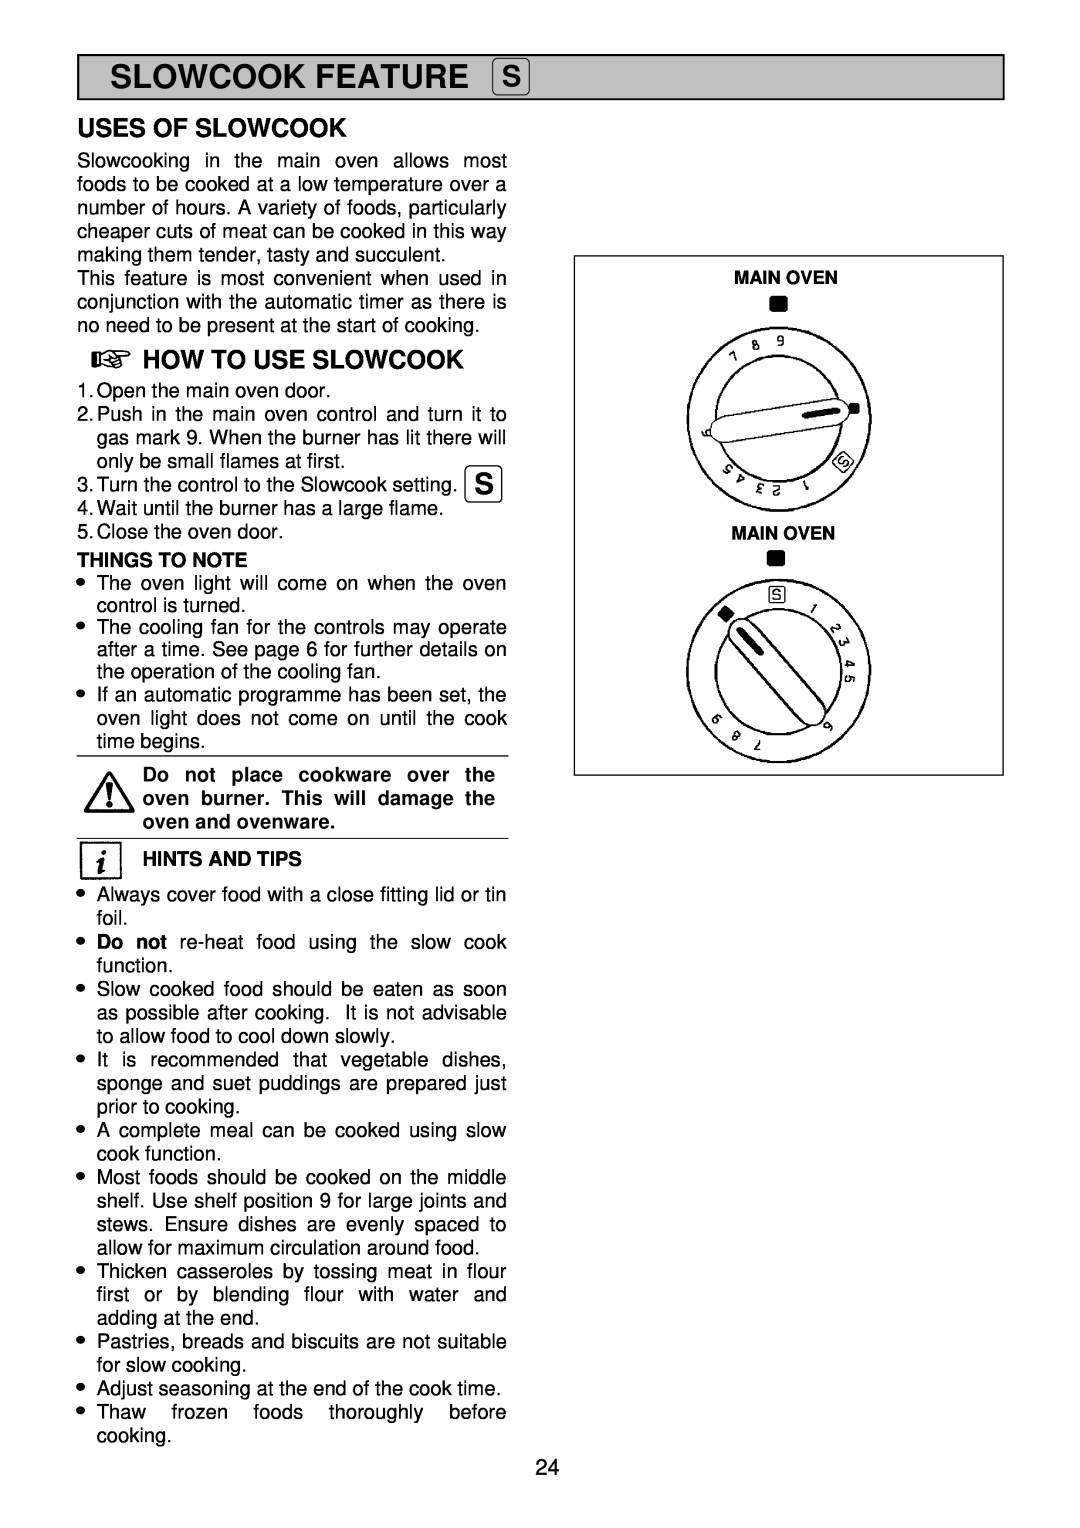 Electrolux EDB 876 manual Slowcook Feature S, Uses Of Slowcook, How To Use Slowcook, Things To Note, Hints And Tips 